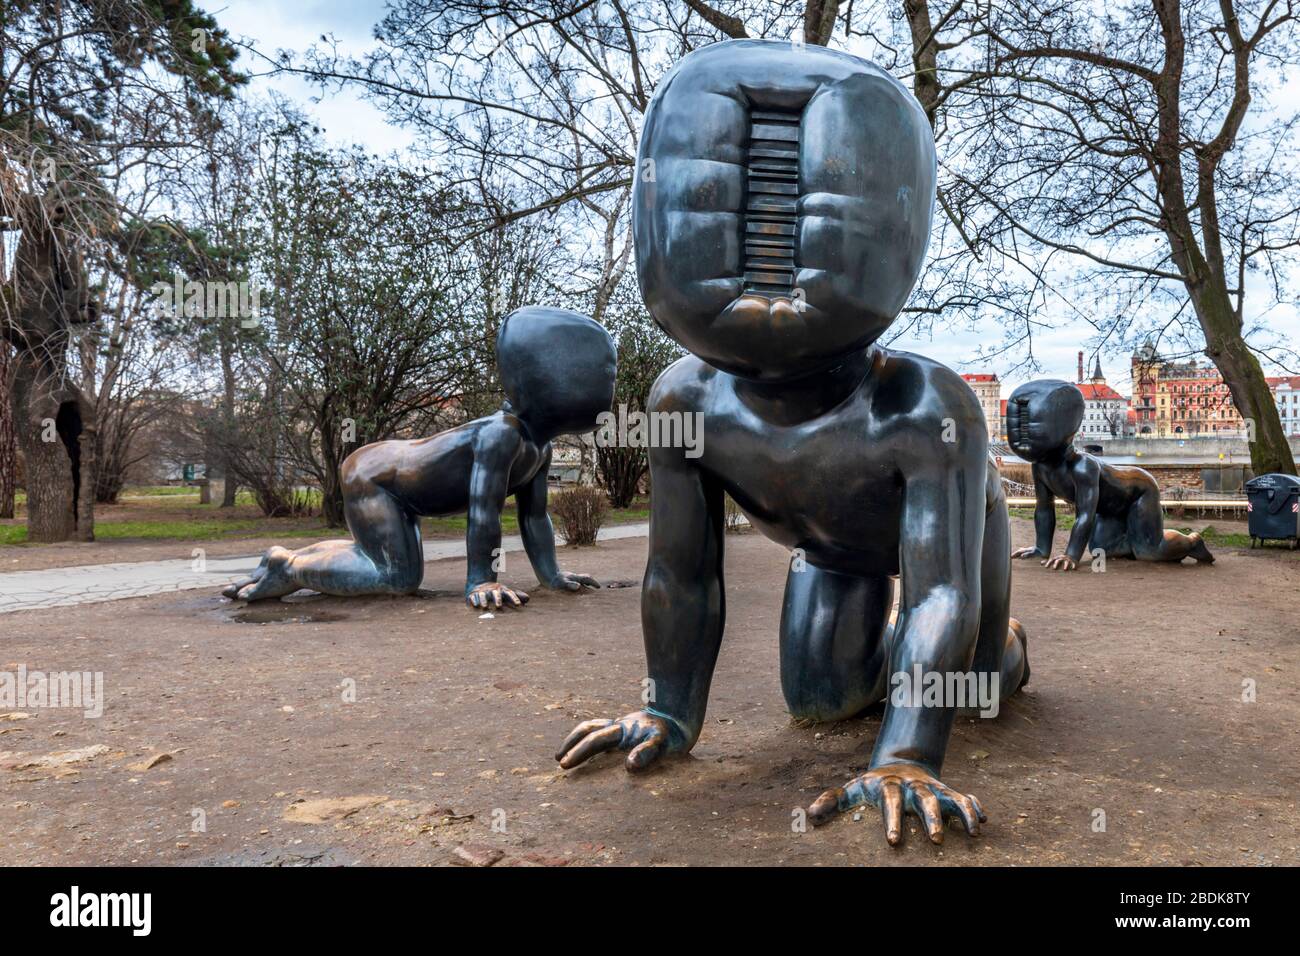 Giant bronze crawling babies located in Prague’s Kampa Park by Czech sculptor and artist David Cerny Stock Photo